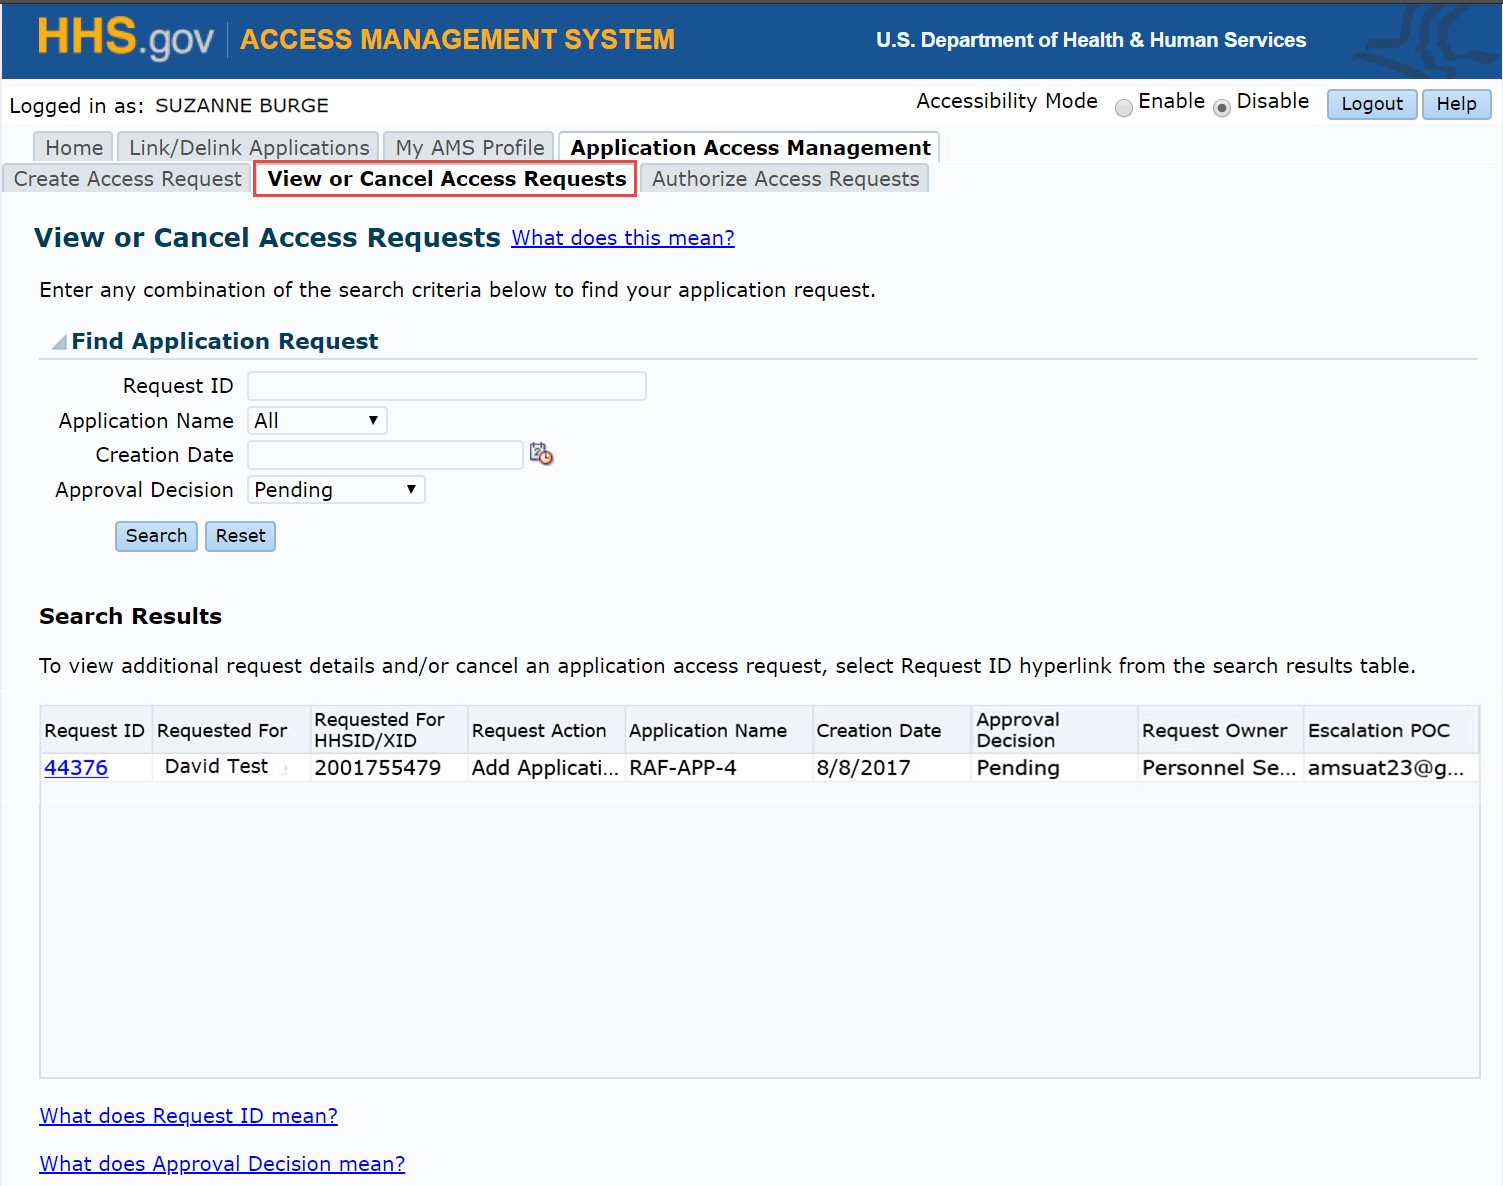 Application access management page with view or cancel access requests tab highlighted